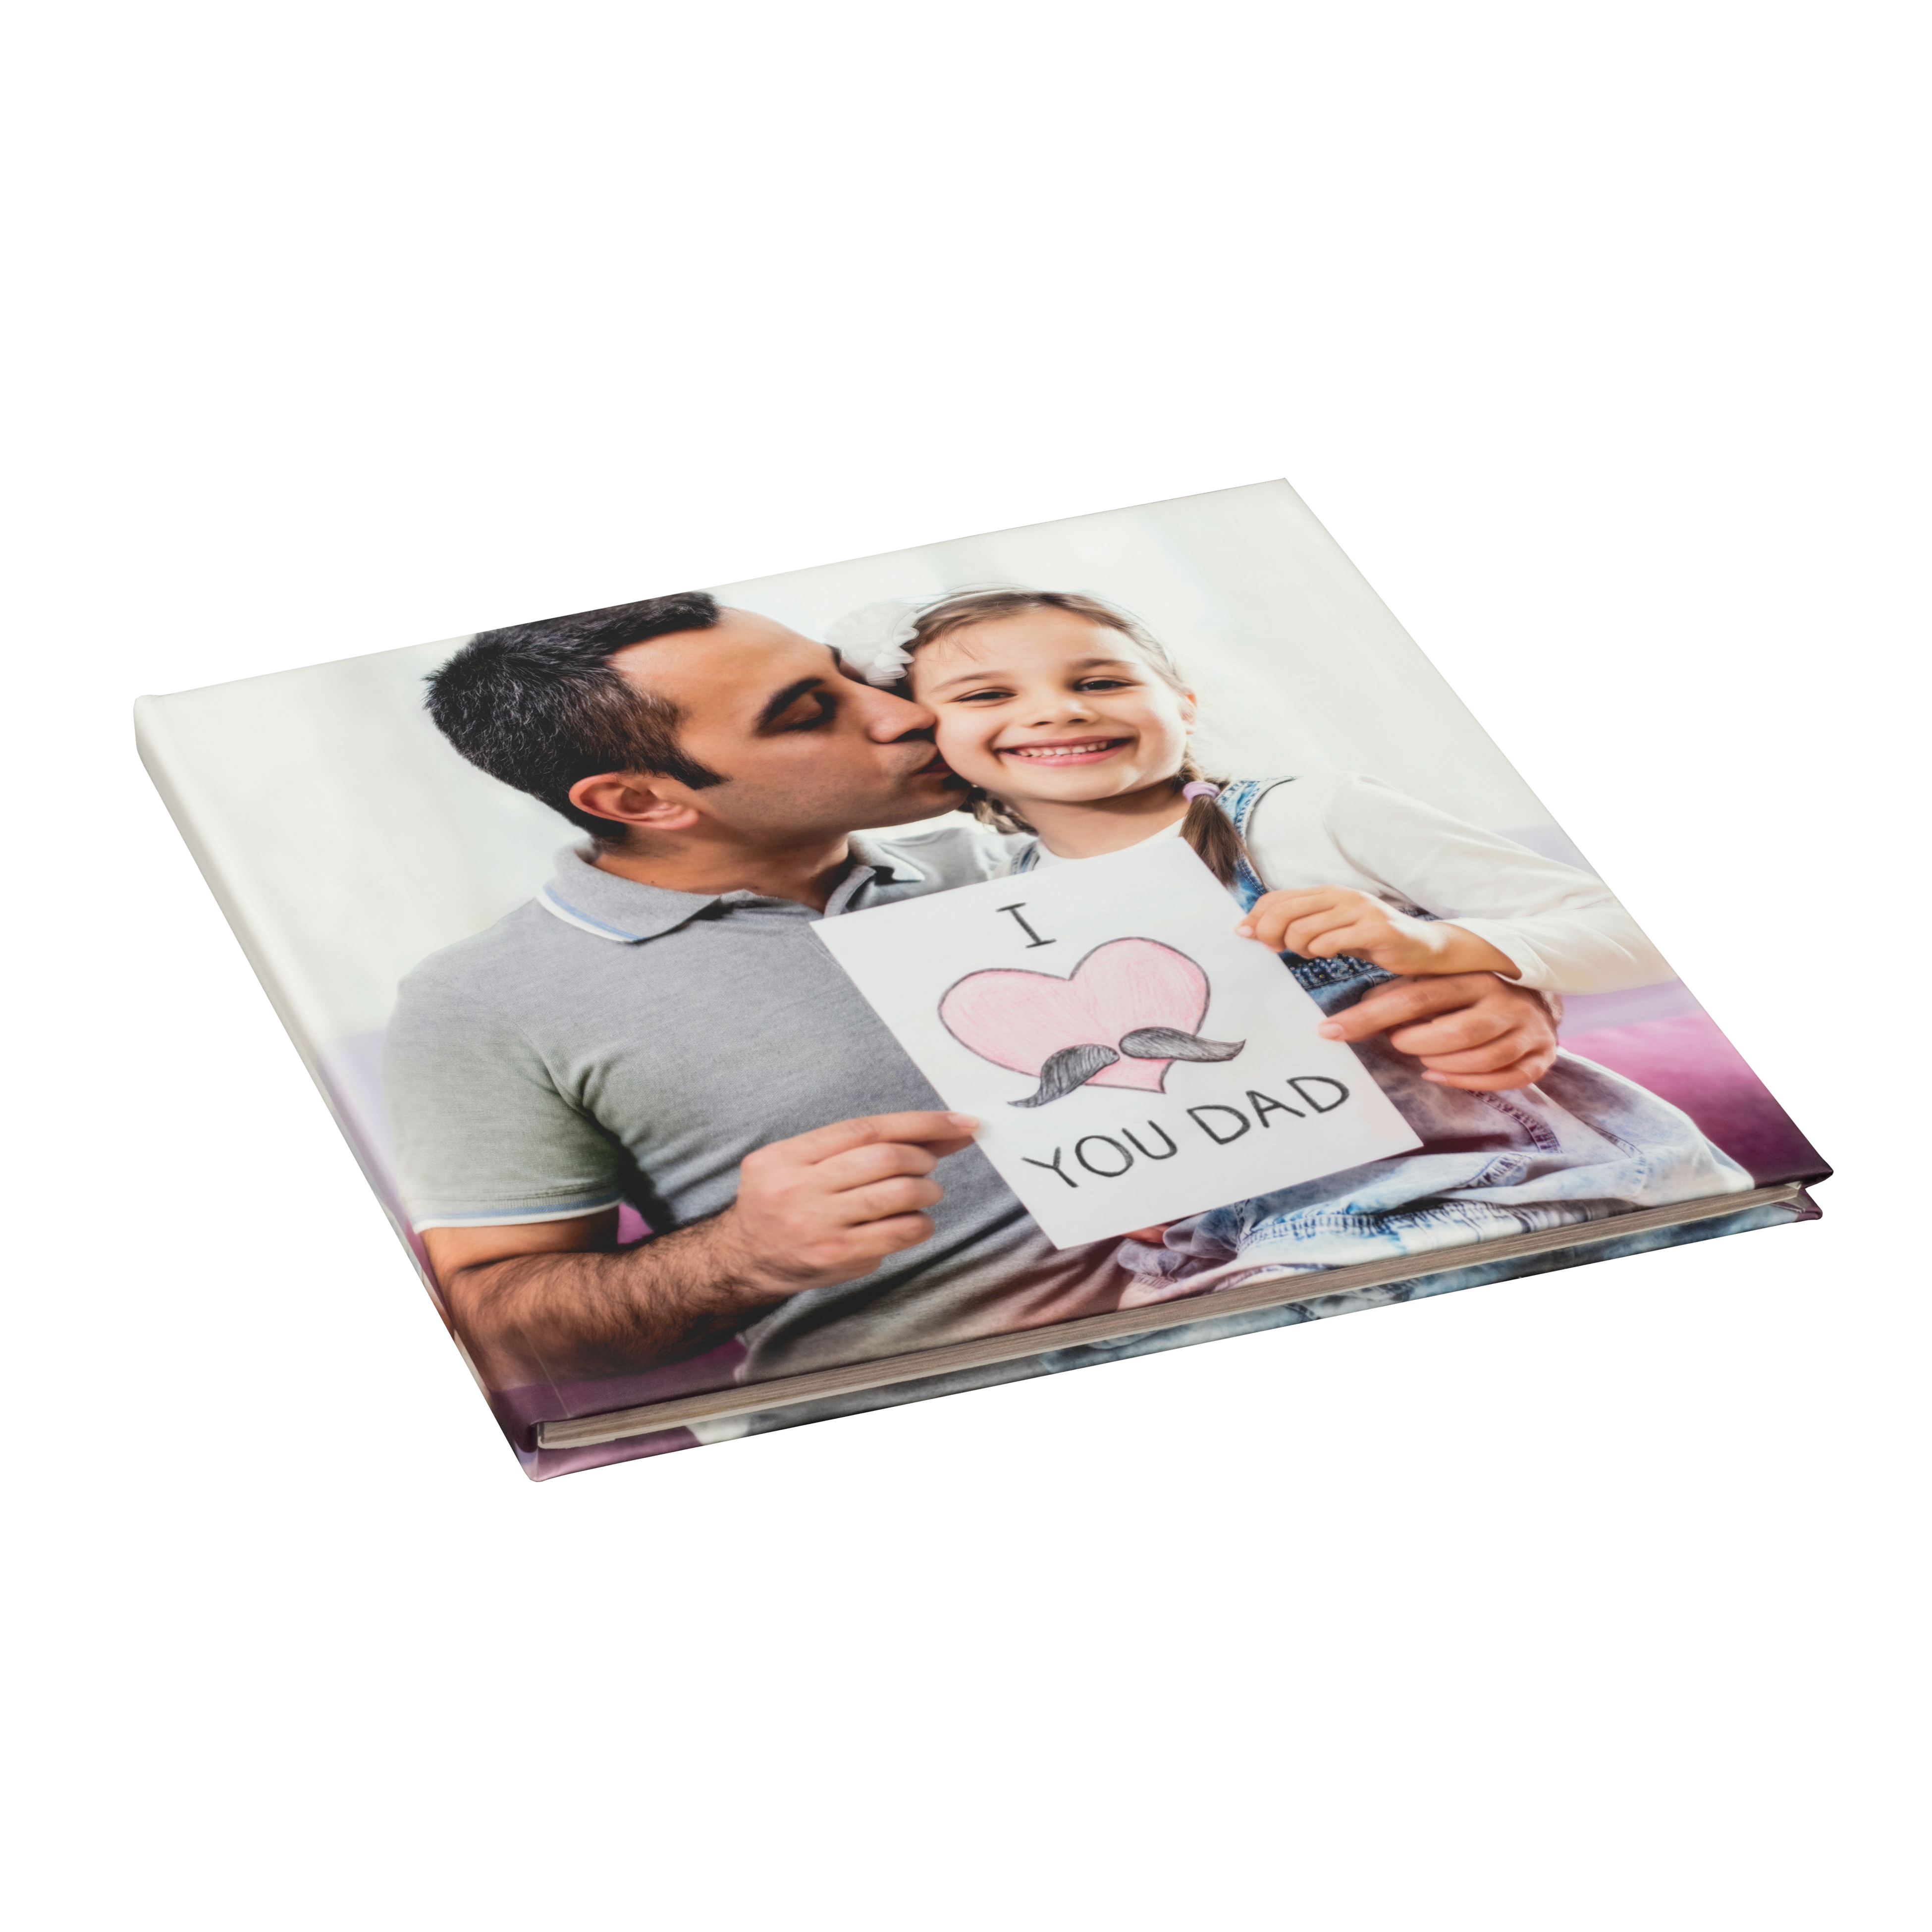 8x8 Hardcover Photo Book with Custom Cover